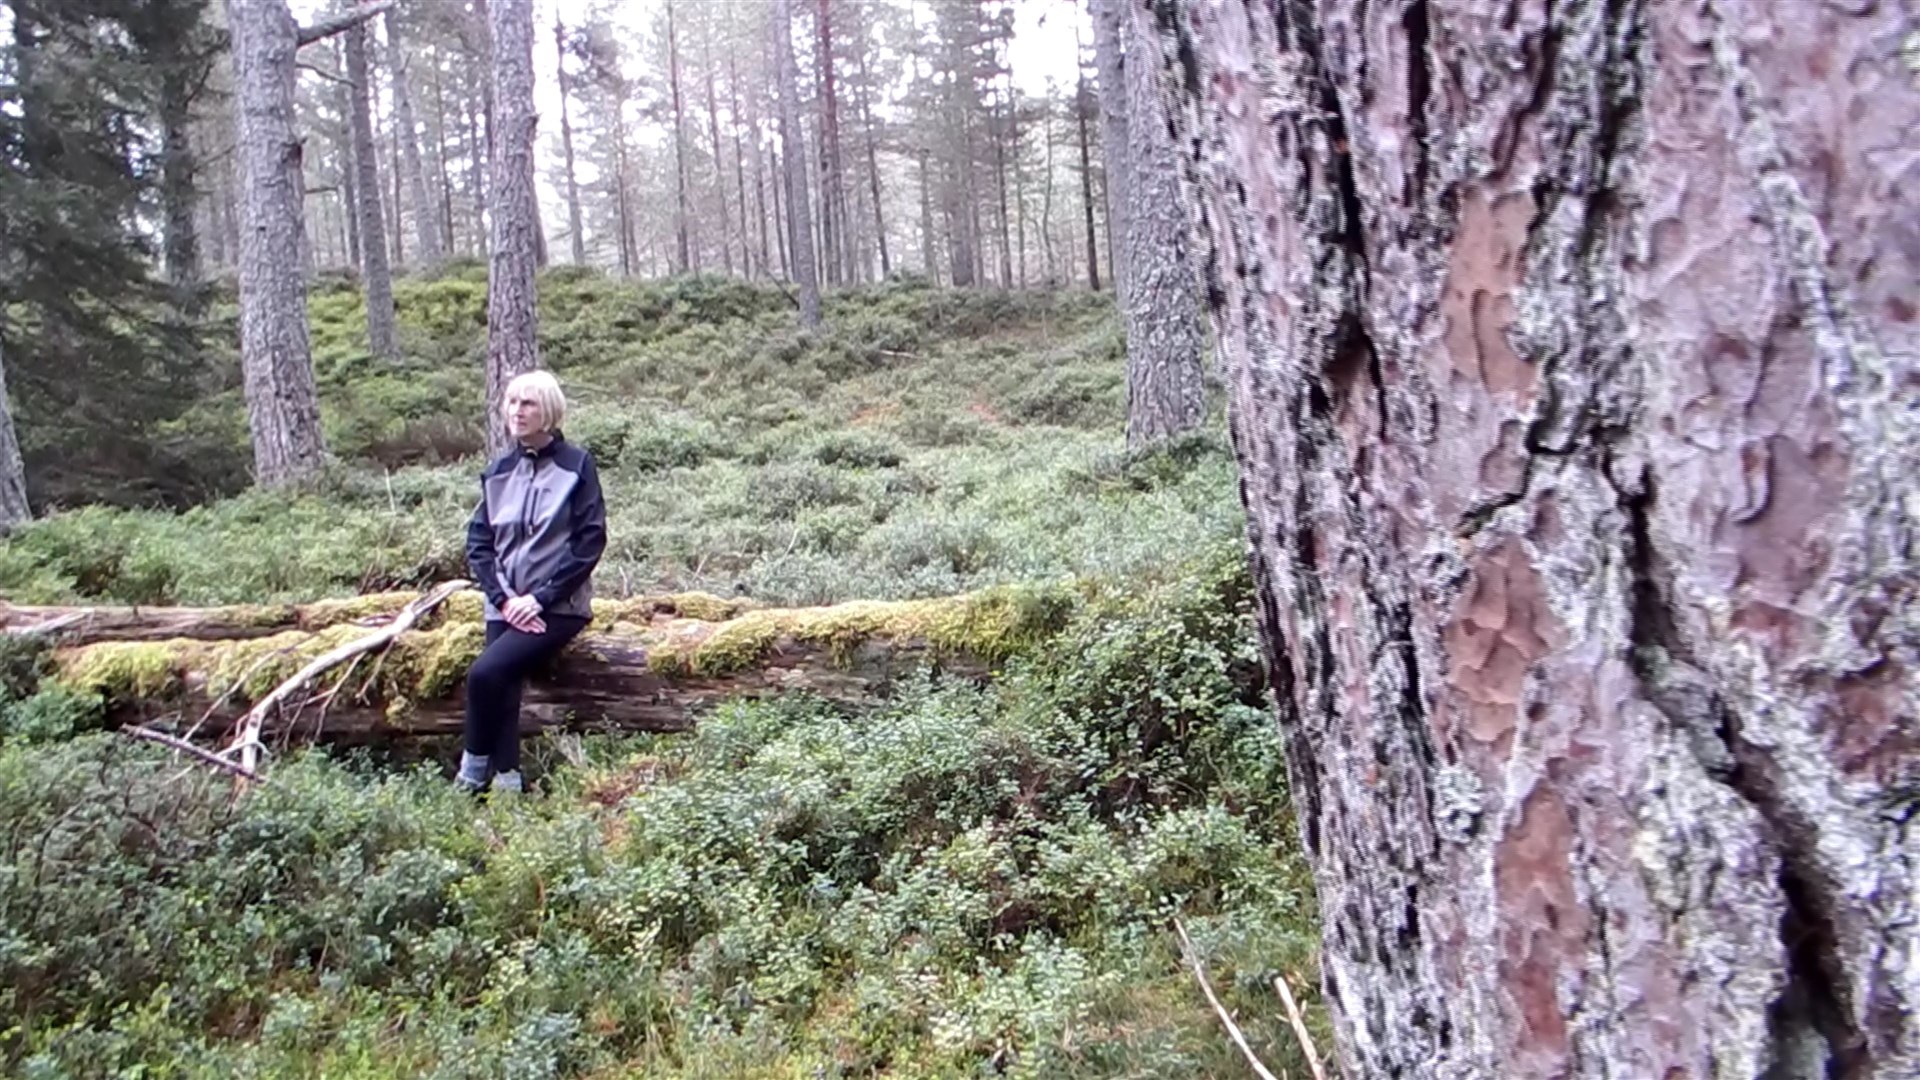 Lin Anderson in the woodlands surrounding her hom village of Carrbridge which has been used as the inspiration for the setting of her new novel.